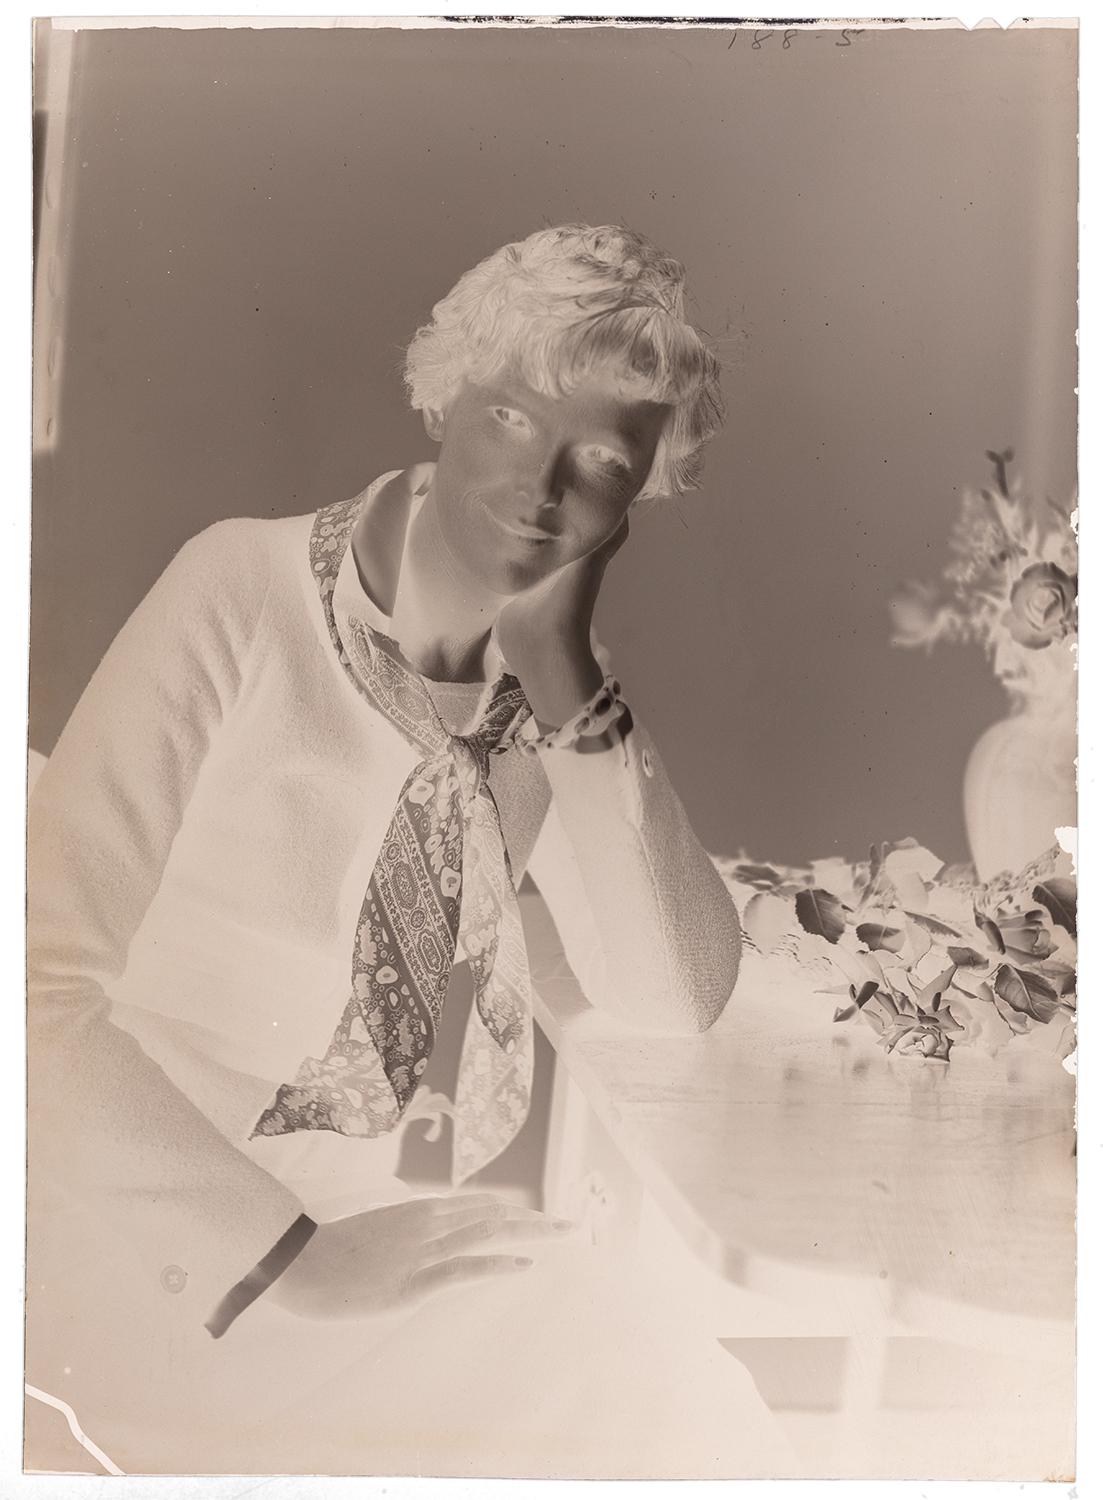 A negative portrait of a woman sitting down with her hand on her cheek and the other on her lap looking towards the camera. There is a vase of flowers beside her. Black and white photograph by Violet Keene Perinchief.